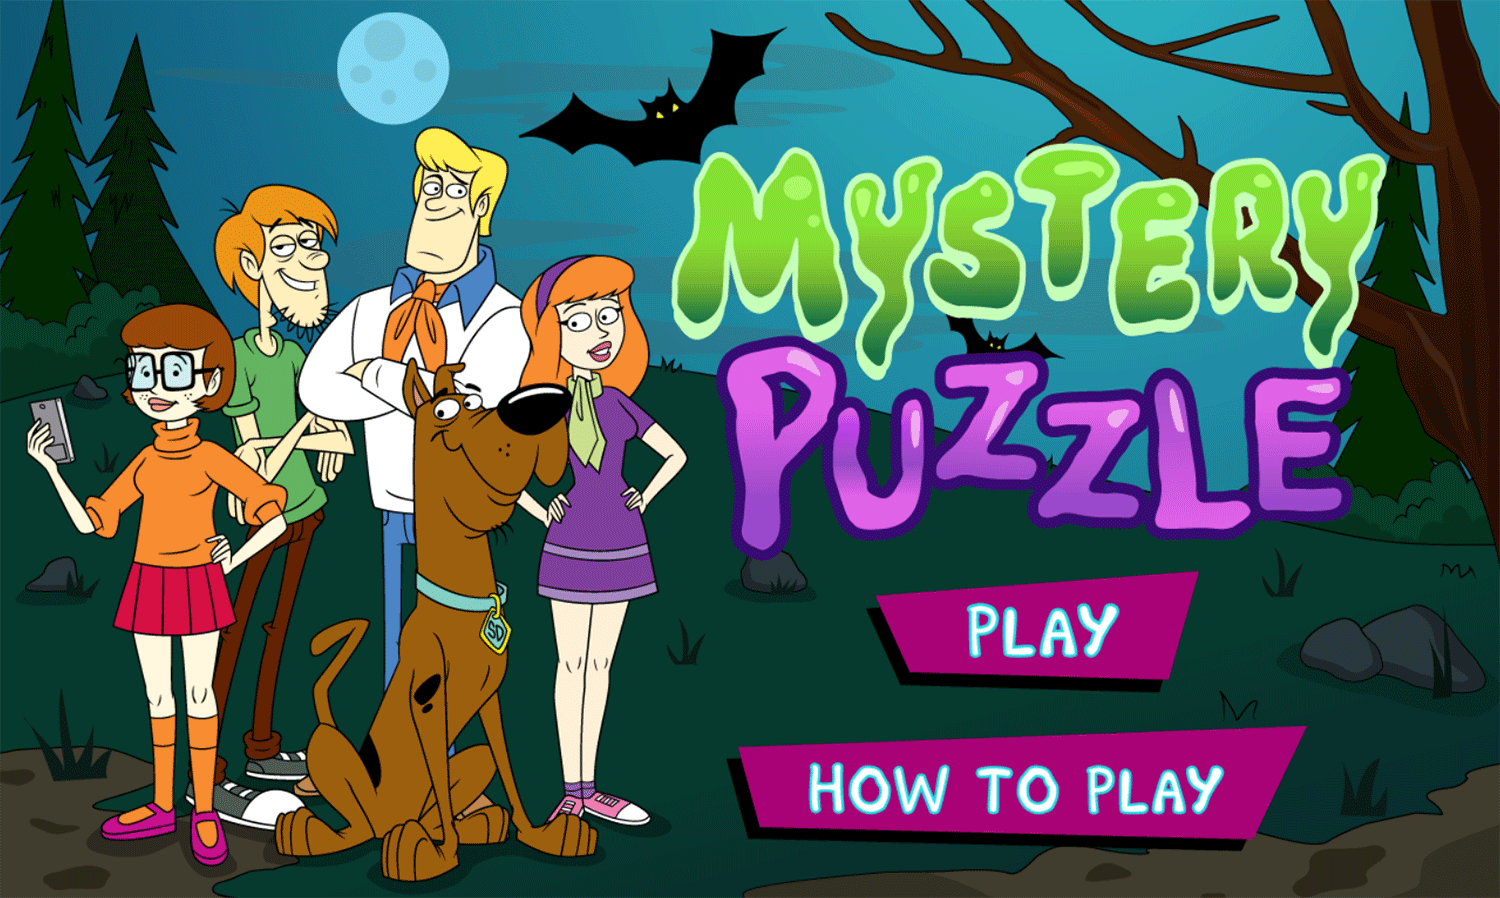 Scooby Doo Mystery Puzzle Welcome Screen Screenshot.